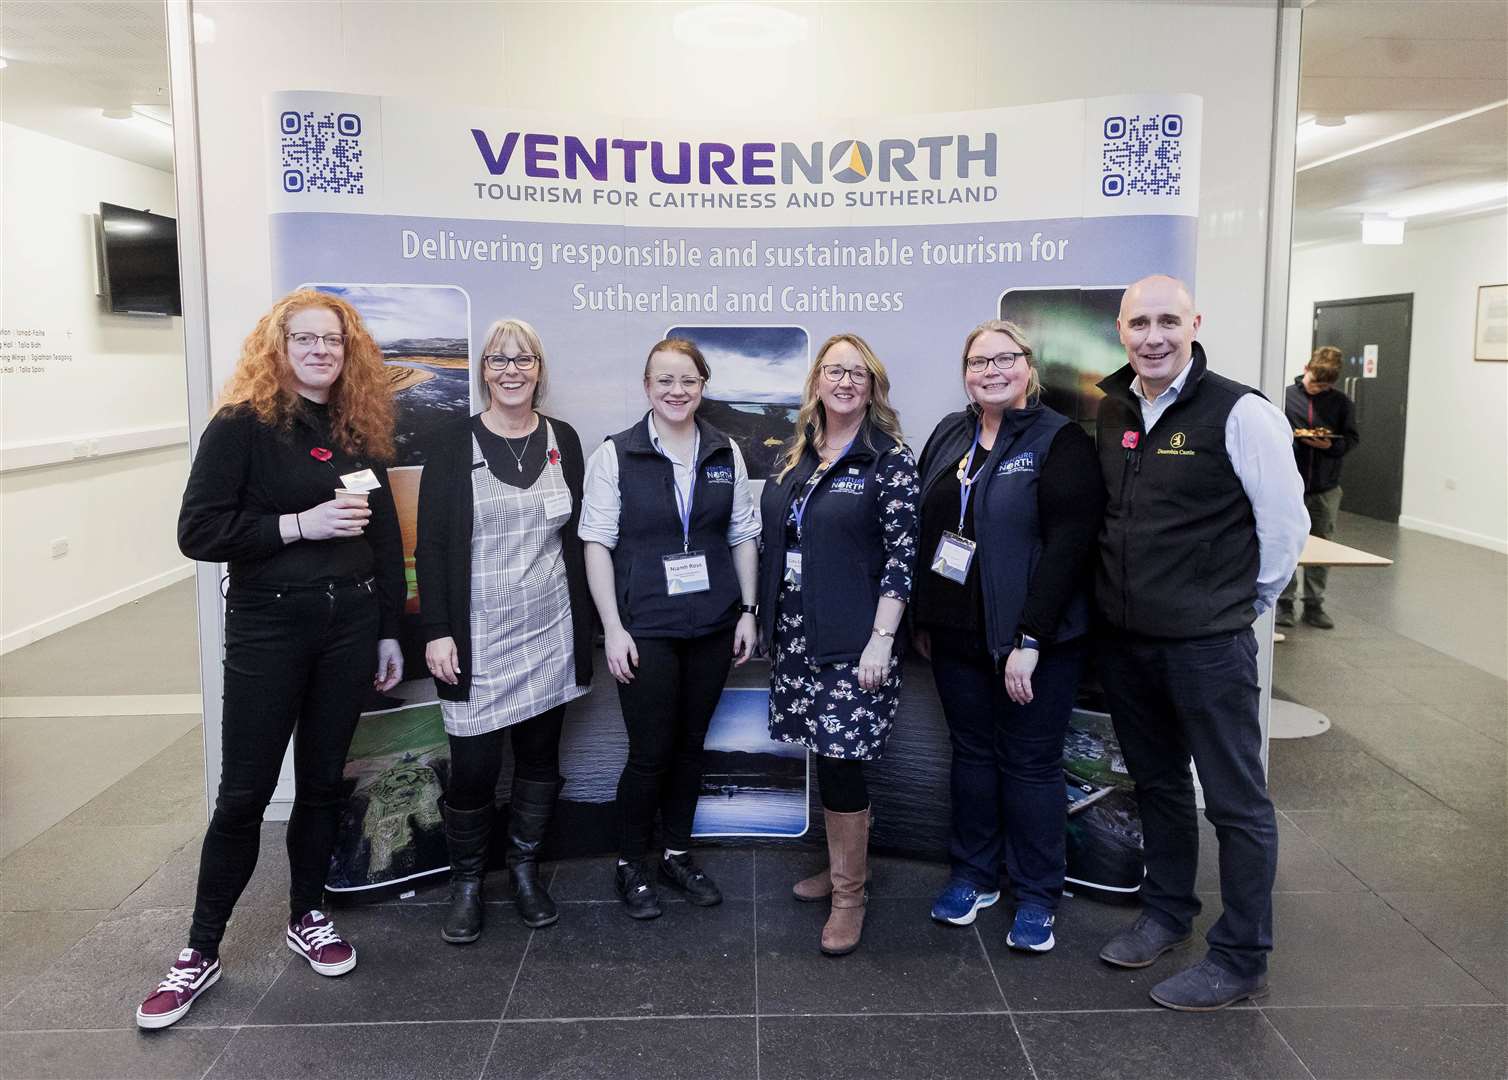 Some of the Venture North board of directors and staff team at last year's Taste North food and drink festival in Wick. From left: Catherine Macleod (board member), Tanya Sutherland (board member), Niamh Ross (staff), Cathy Earnshaw (staff), Susan Barrie (staff) and Scott Morrison (board member). Picture: Colin Campbell